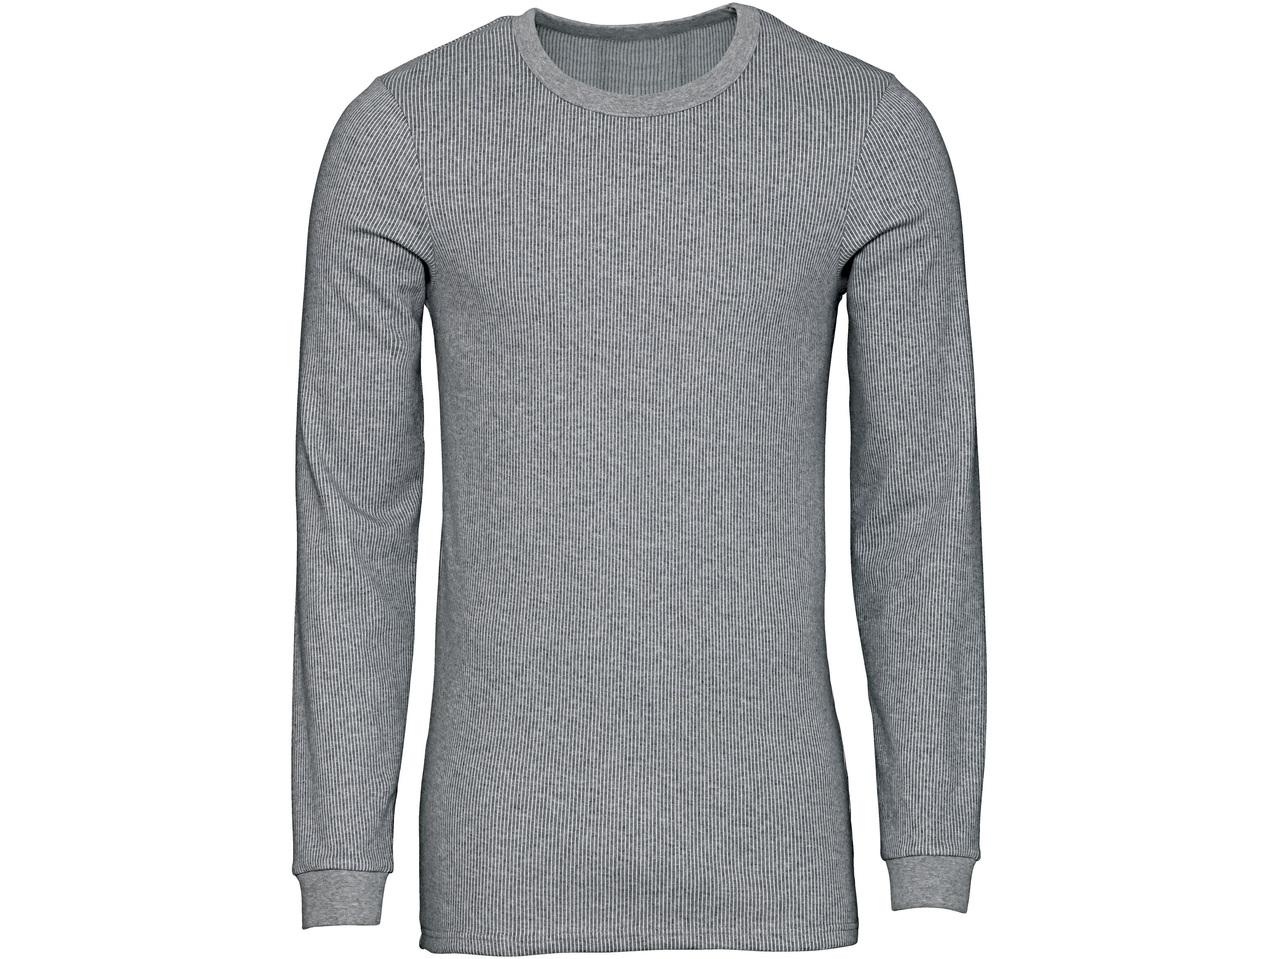 LIVERGY Men's Thermal Top